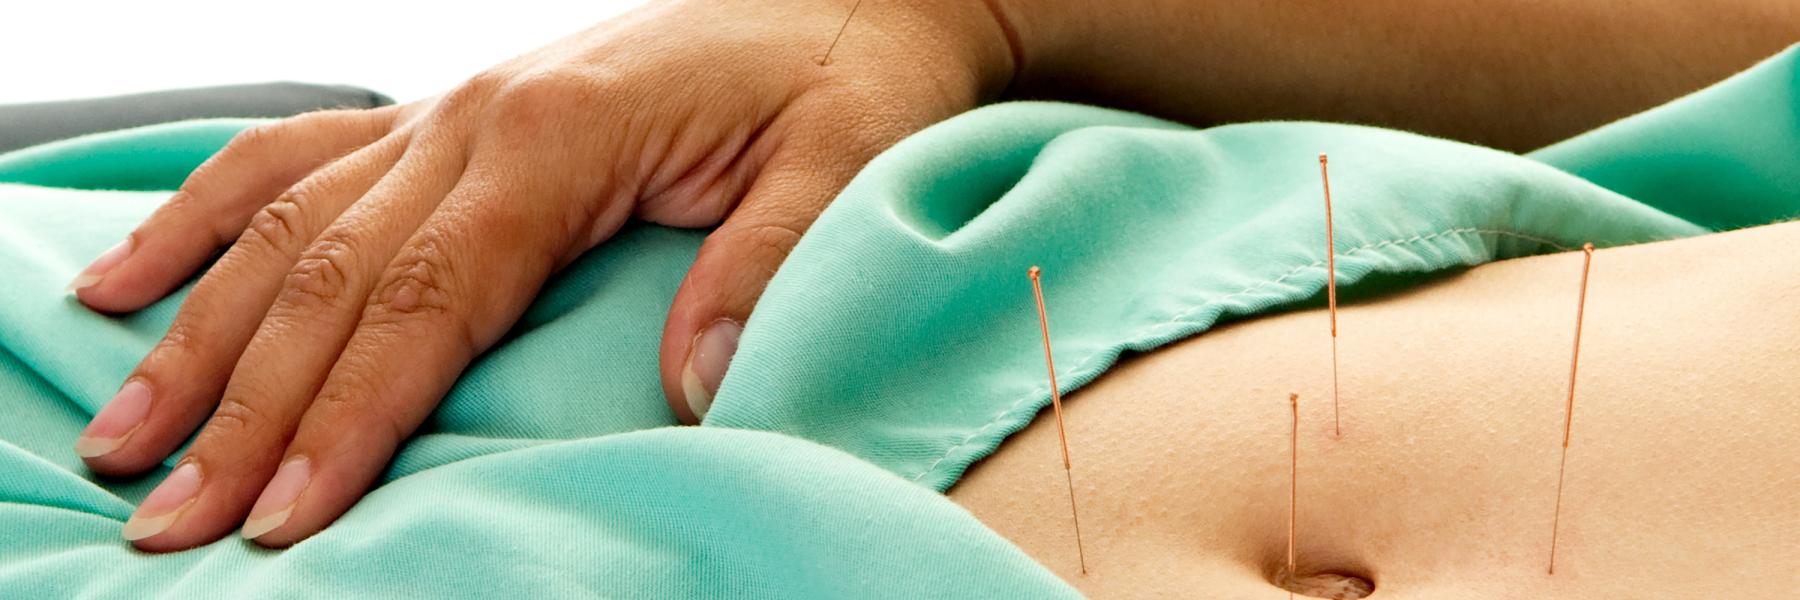 Acupuncture for endo pain relief